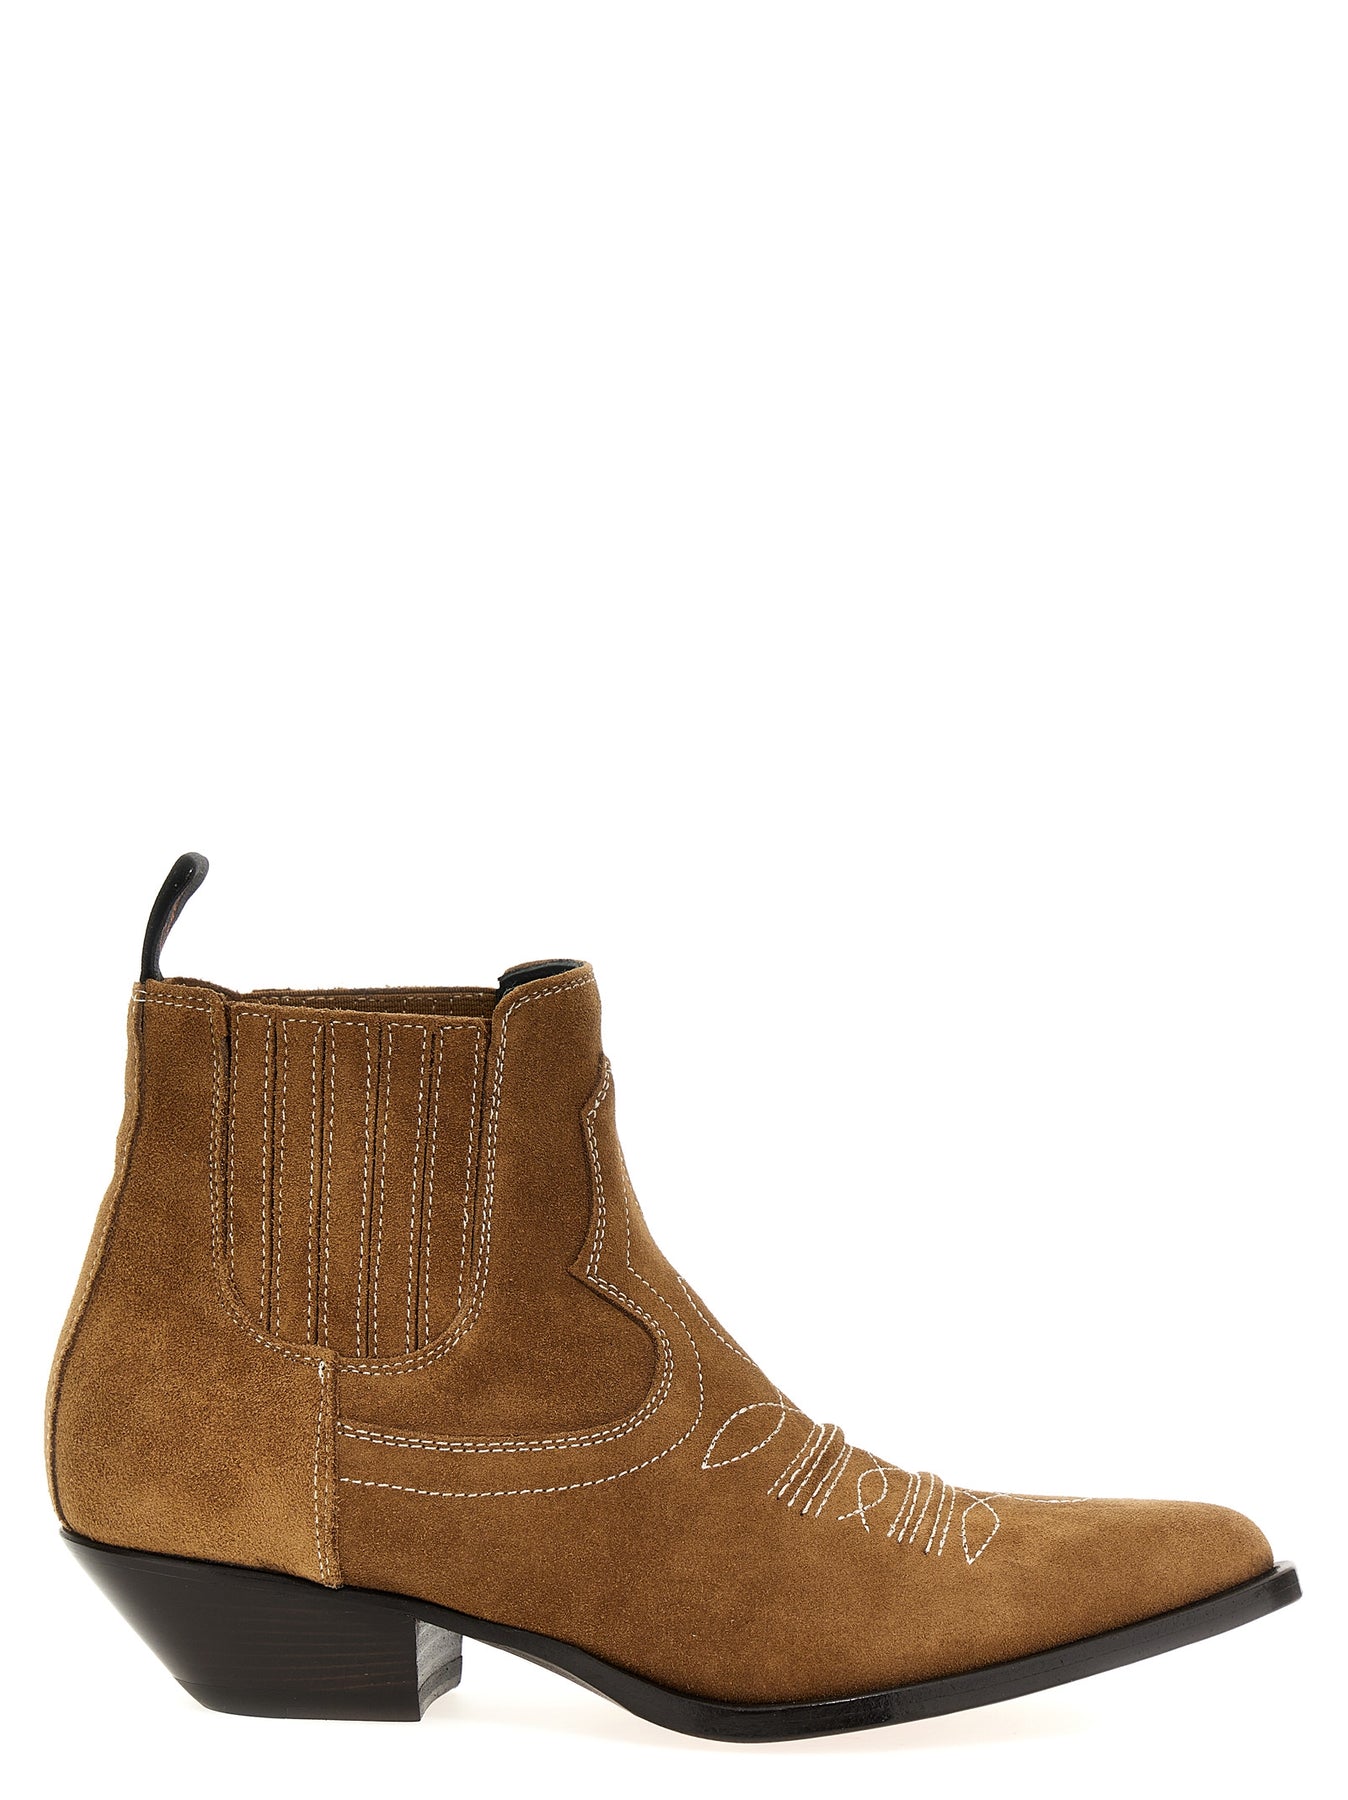 SONORA HIDALGO FLOWER BOOTS, ANKLE BOOTS BEIGE